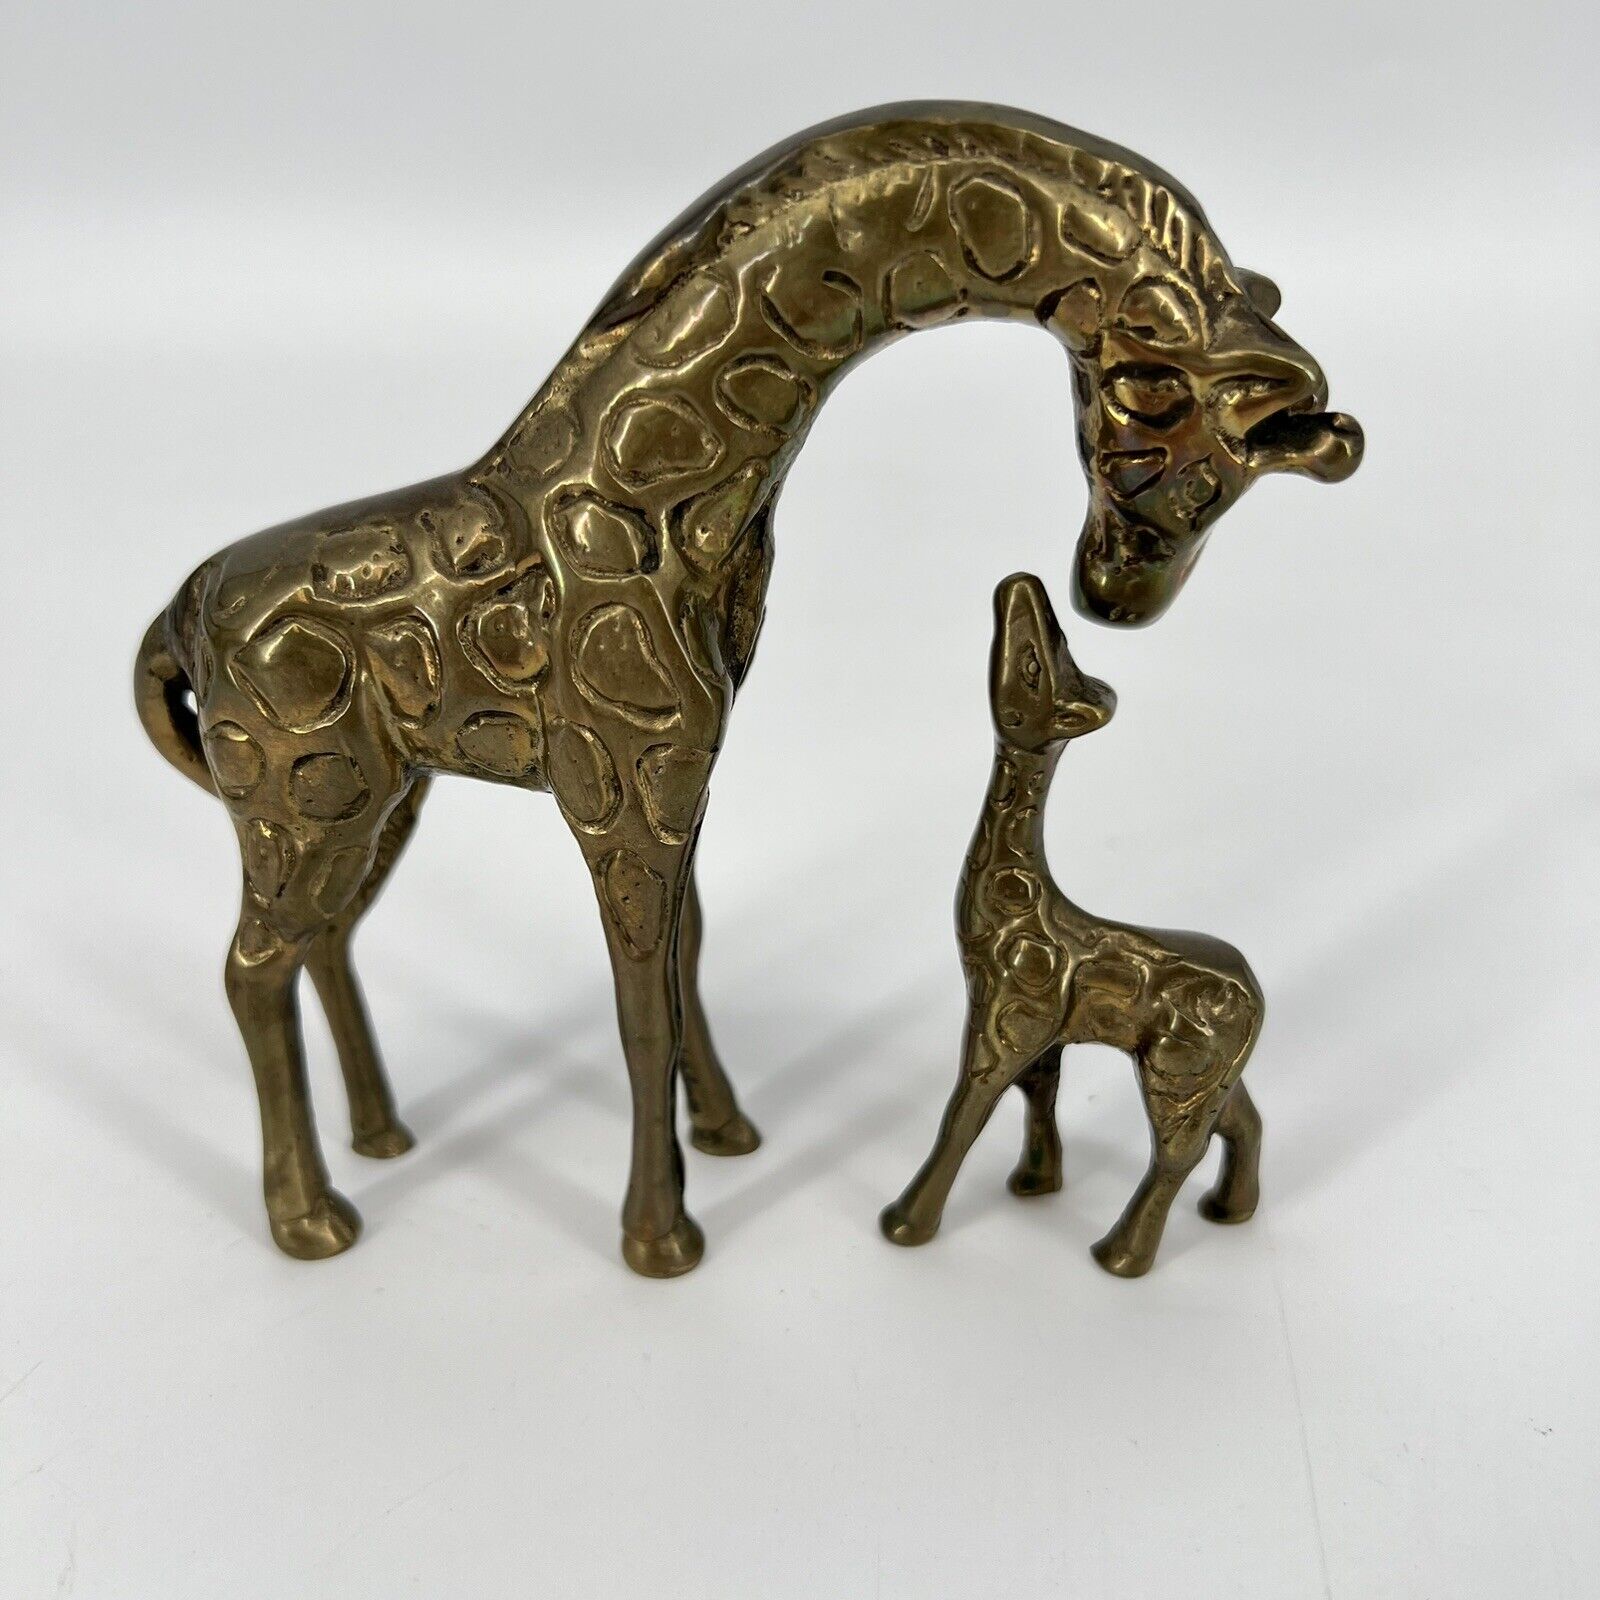 Vintage Solid Brass Giraffe Mother and Baby Kissing Figurines